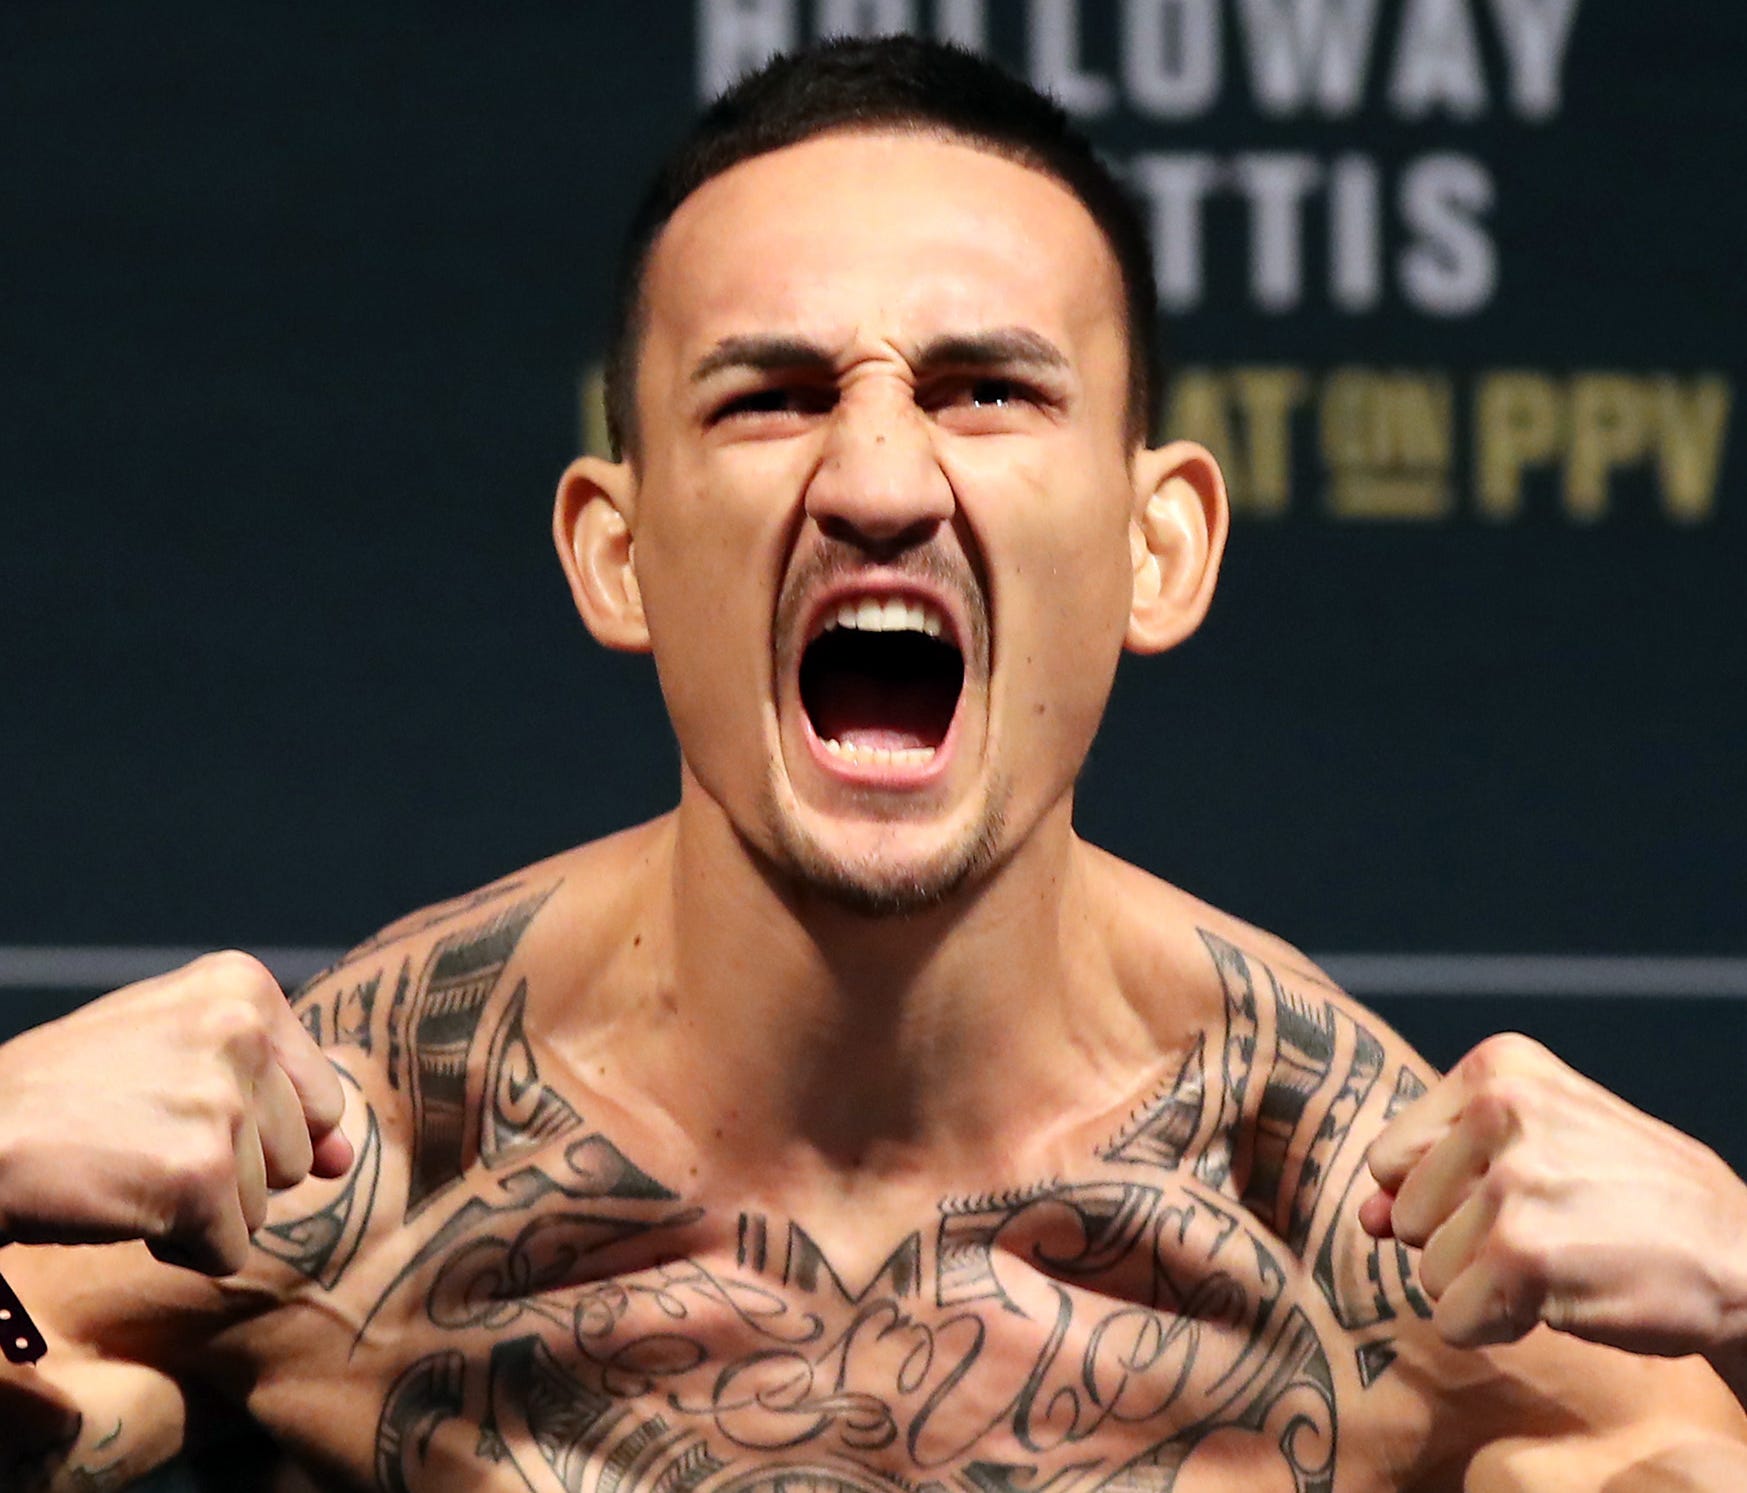 Max Holloway was declared medically unfit to fight at UFC 223.